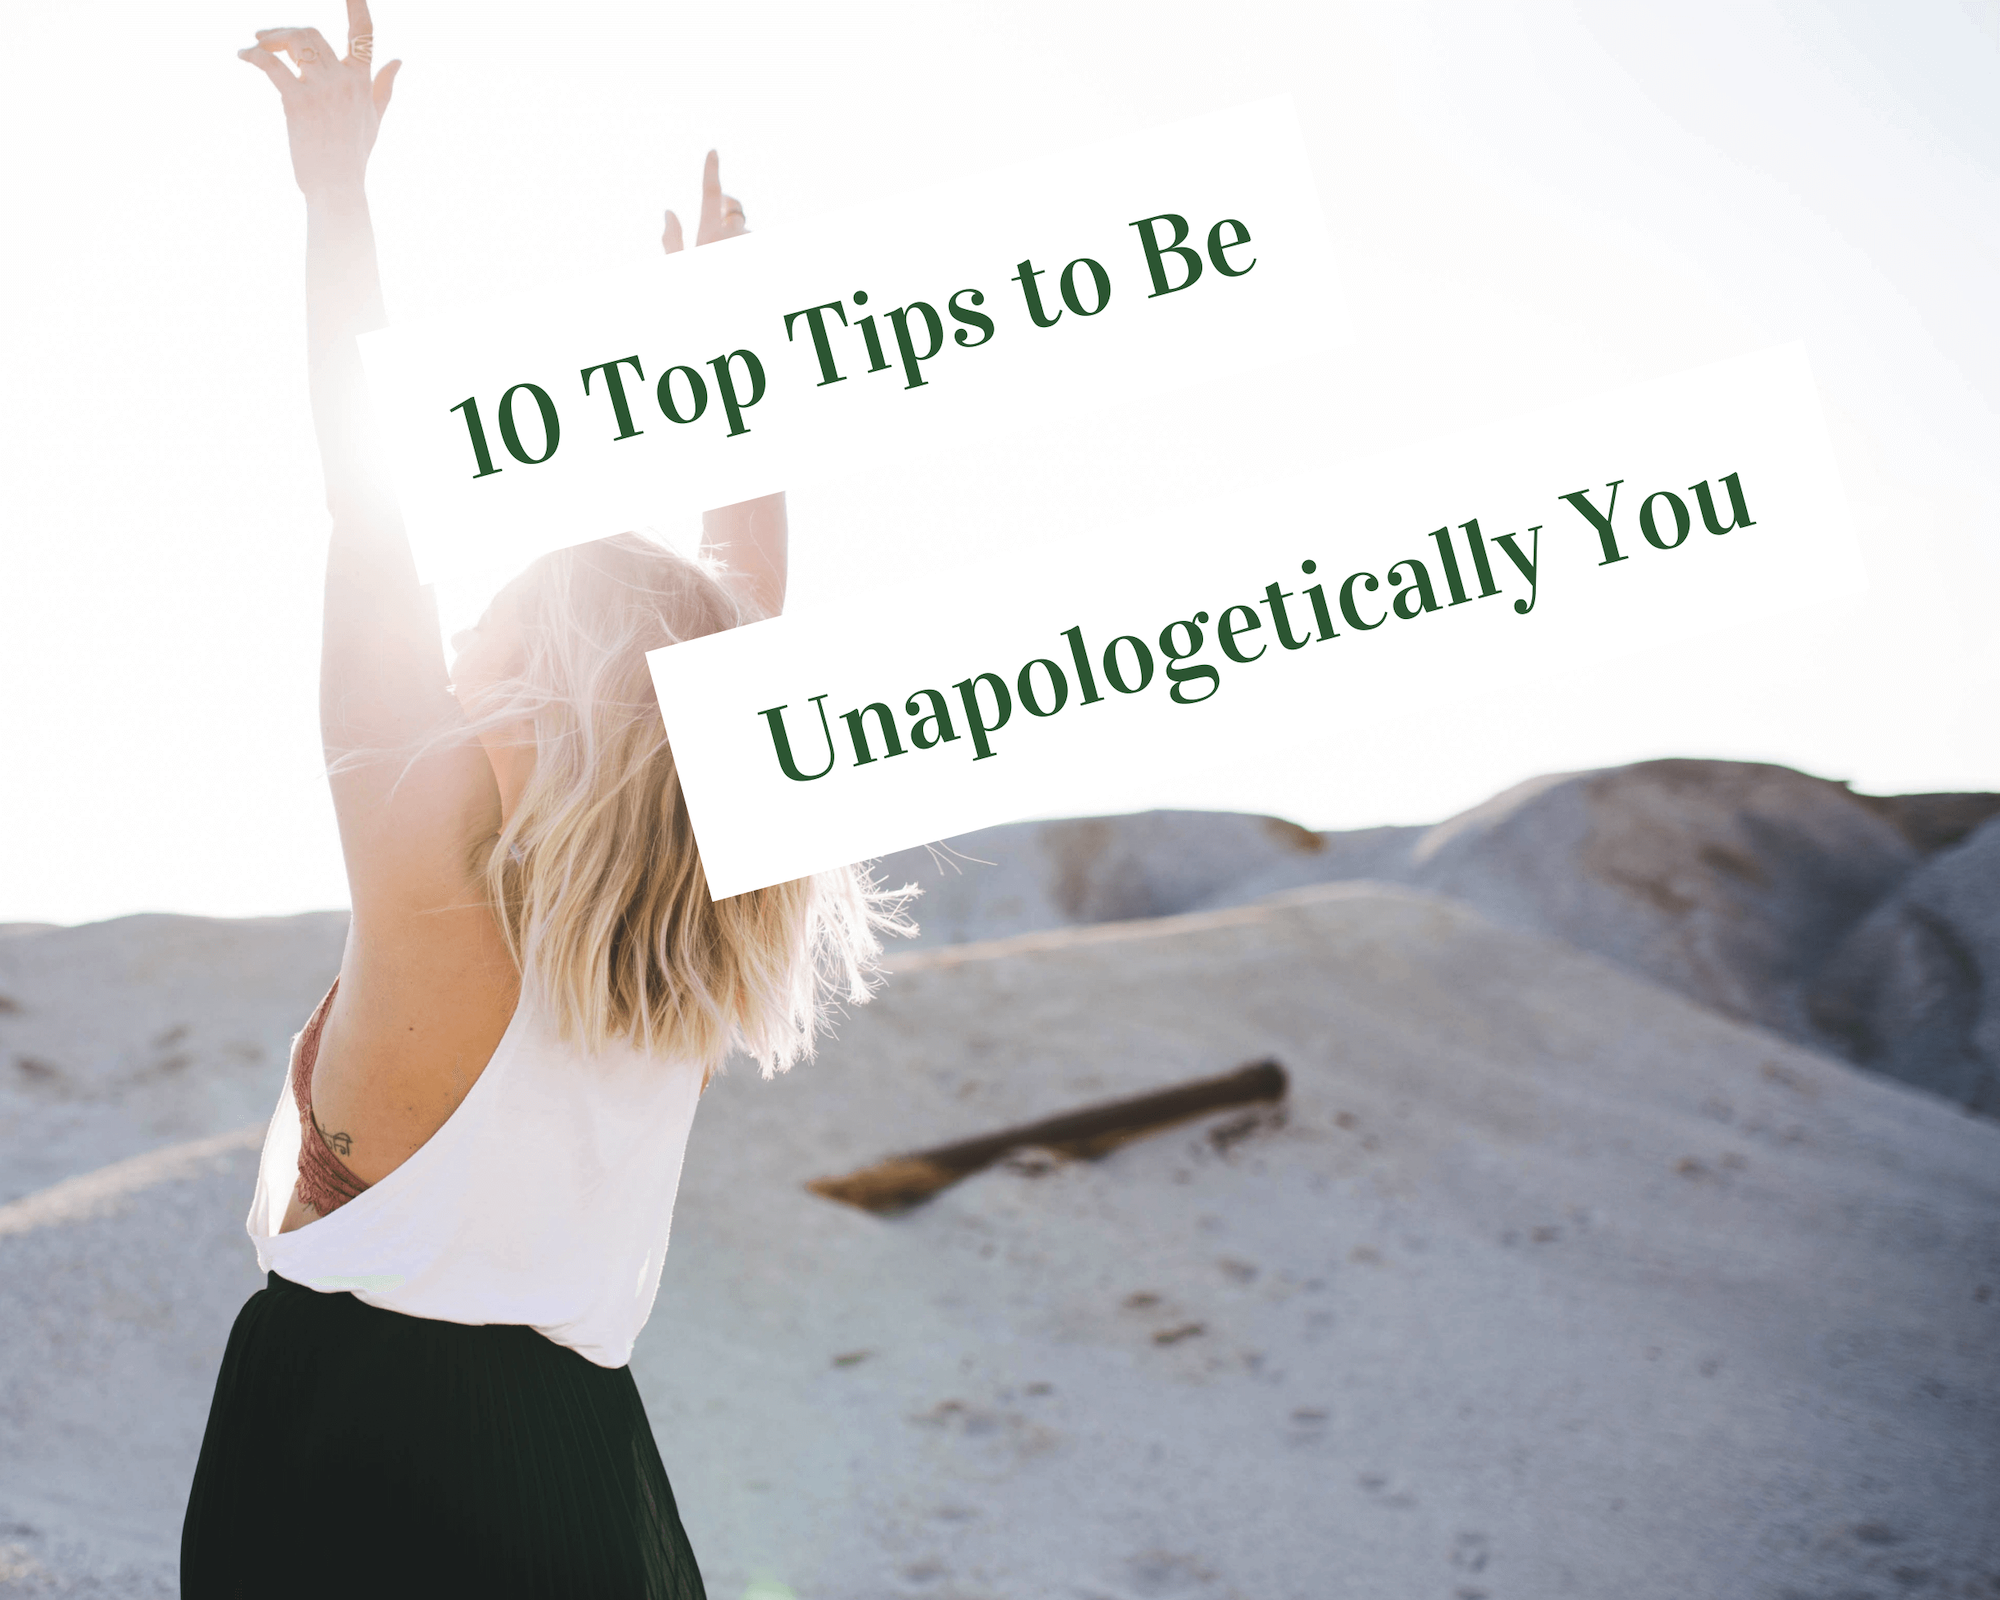 10 top tips to be unapologetically you